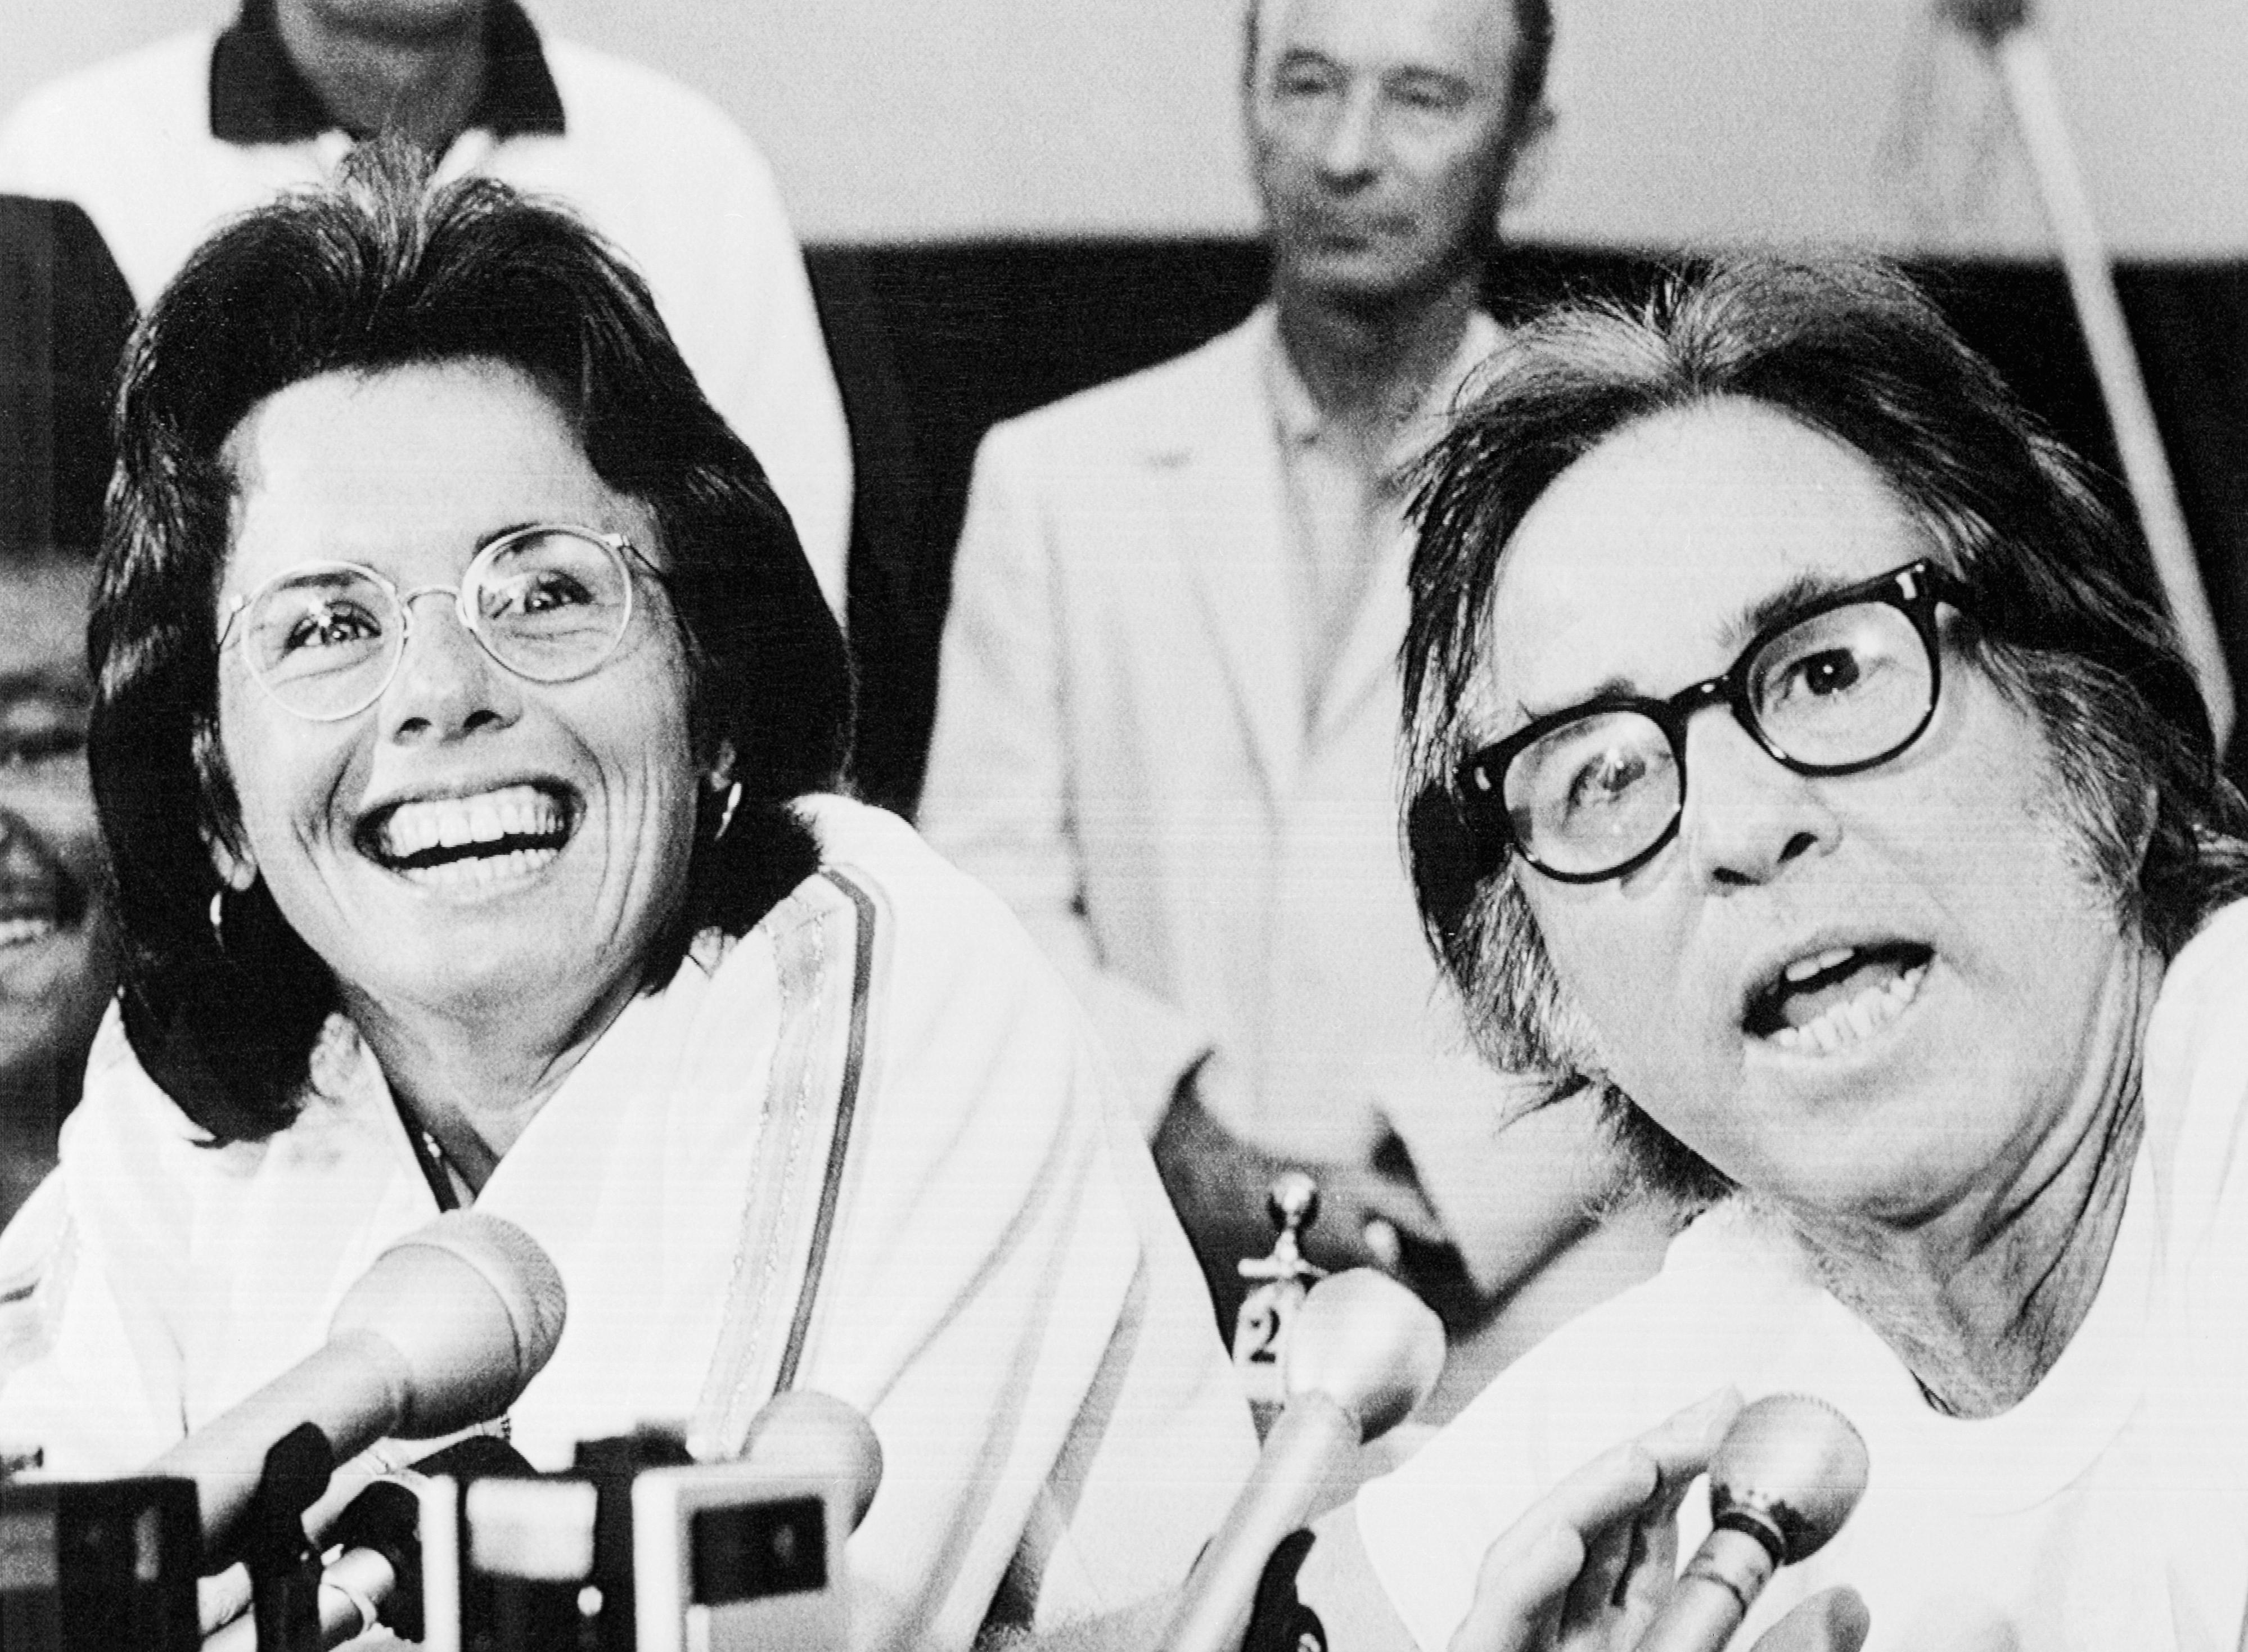 Bobby Riggs and Billie Jean King pose for the press before tennis match.